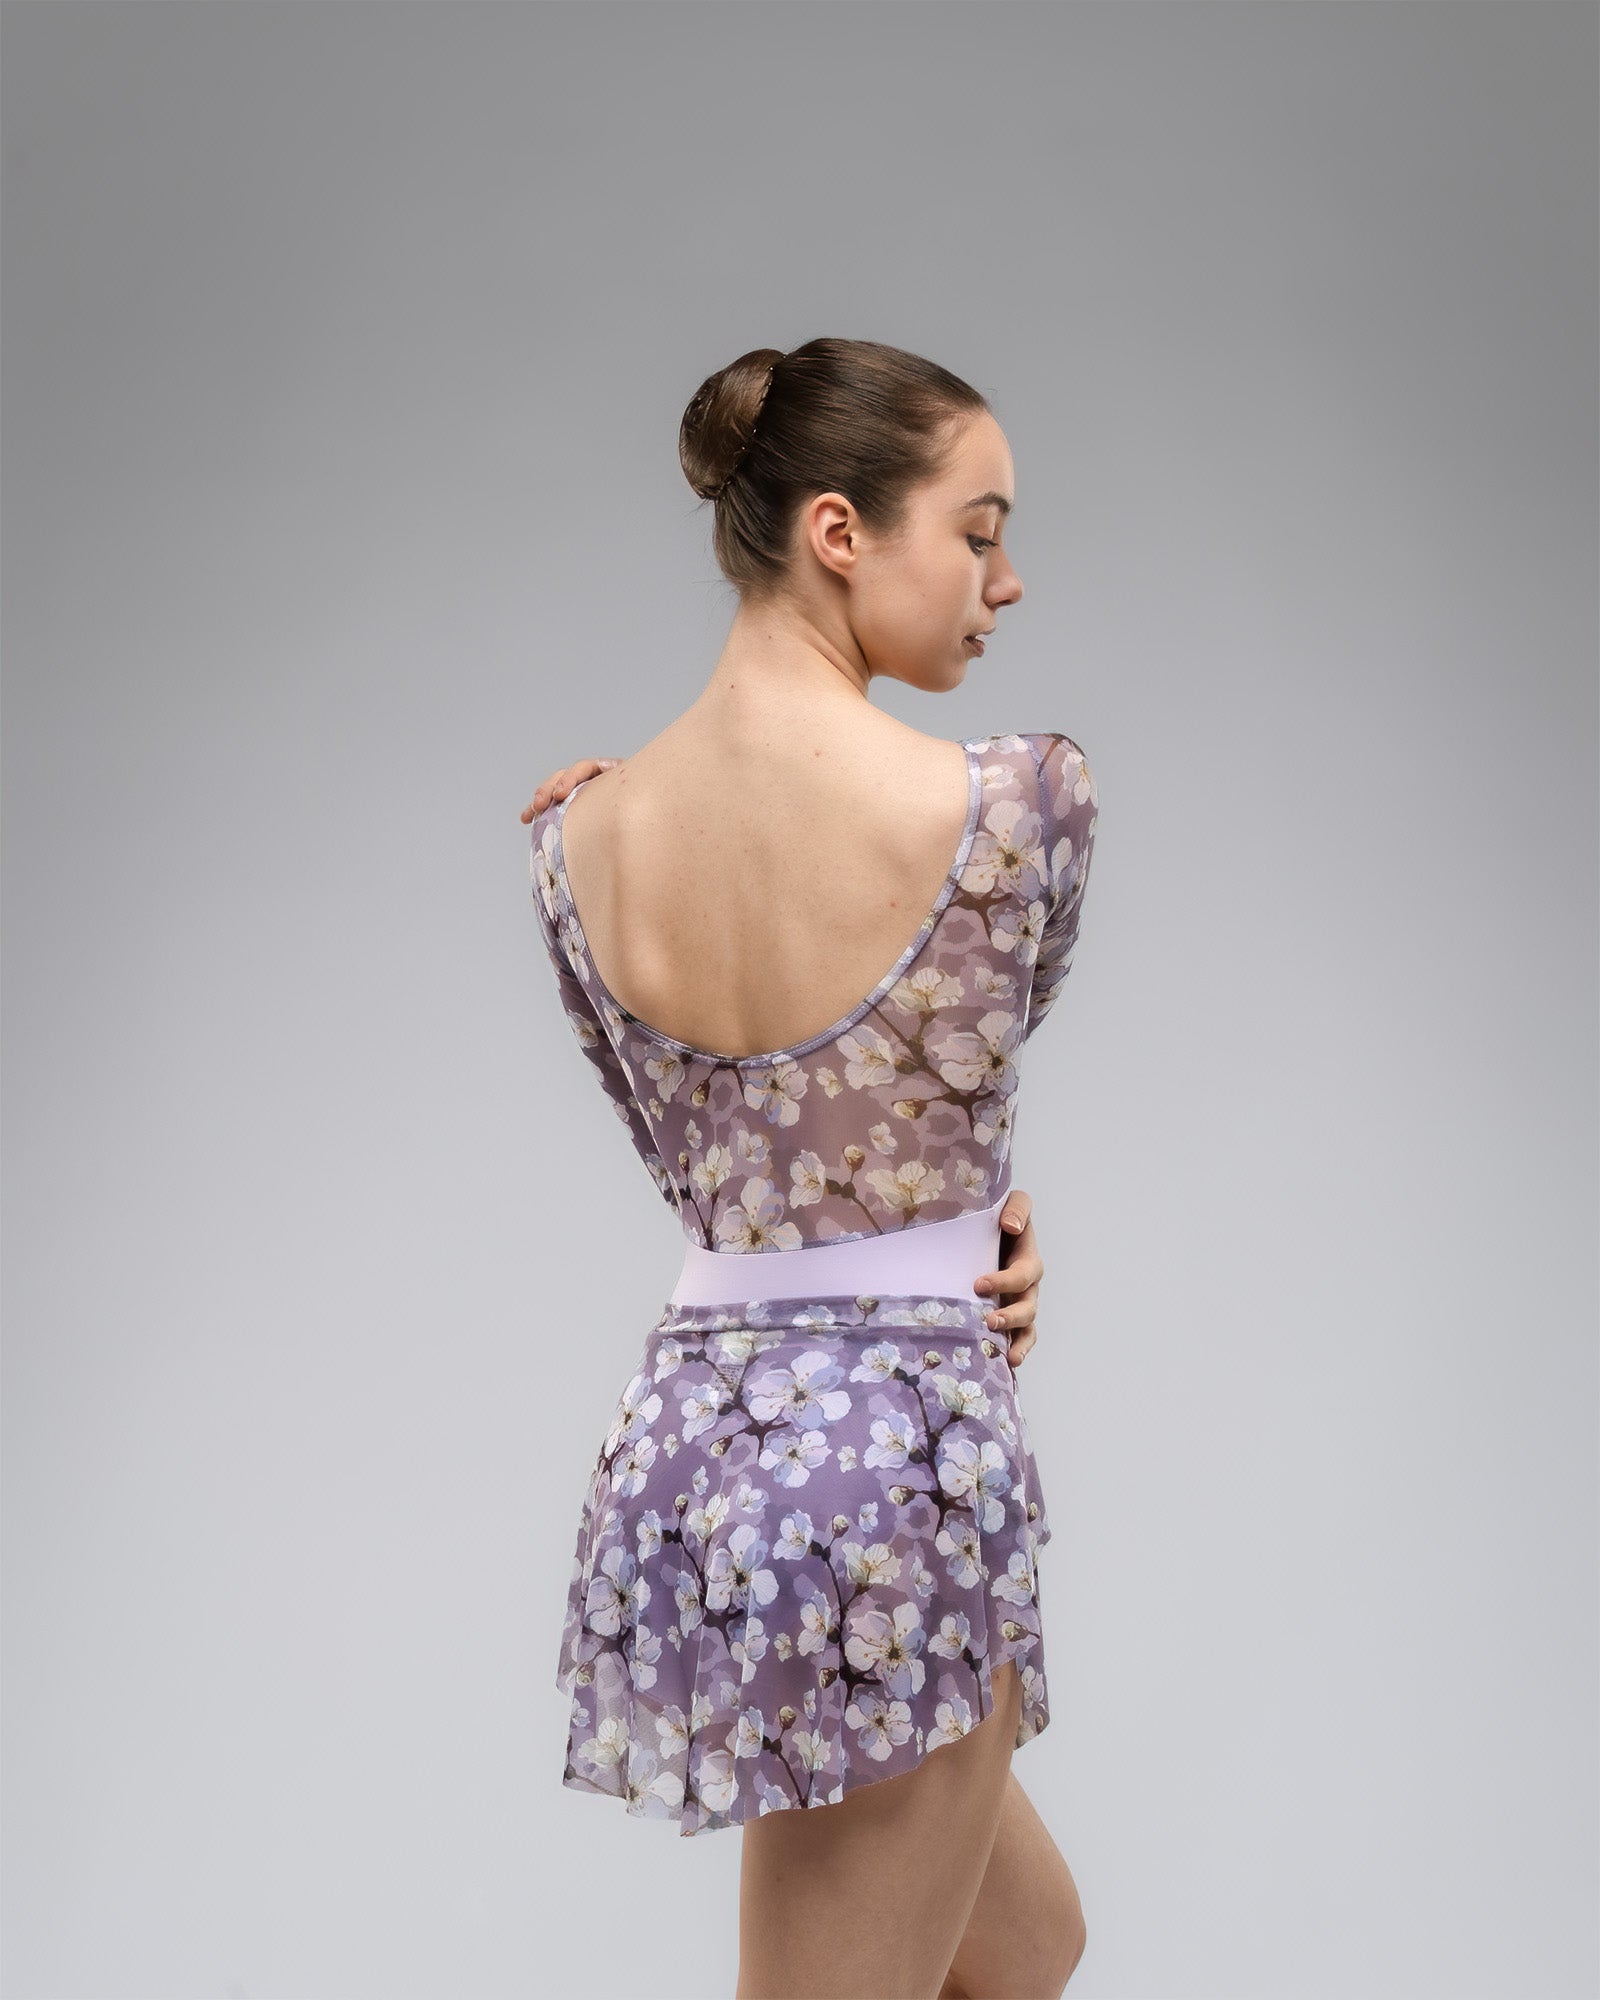 Ballet dancer wearing lilac leotard With long sleeves, floral print mash upper body lilac white and purple With matching Ballet  skirt